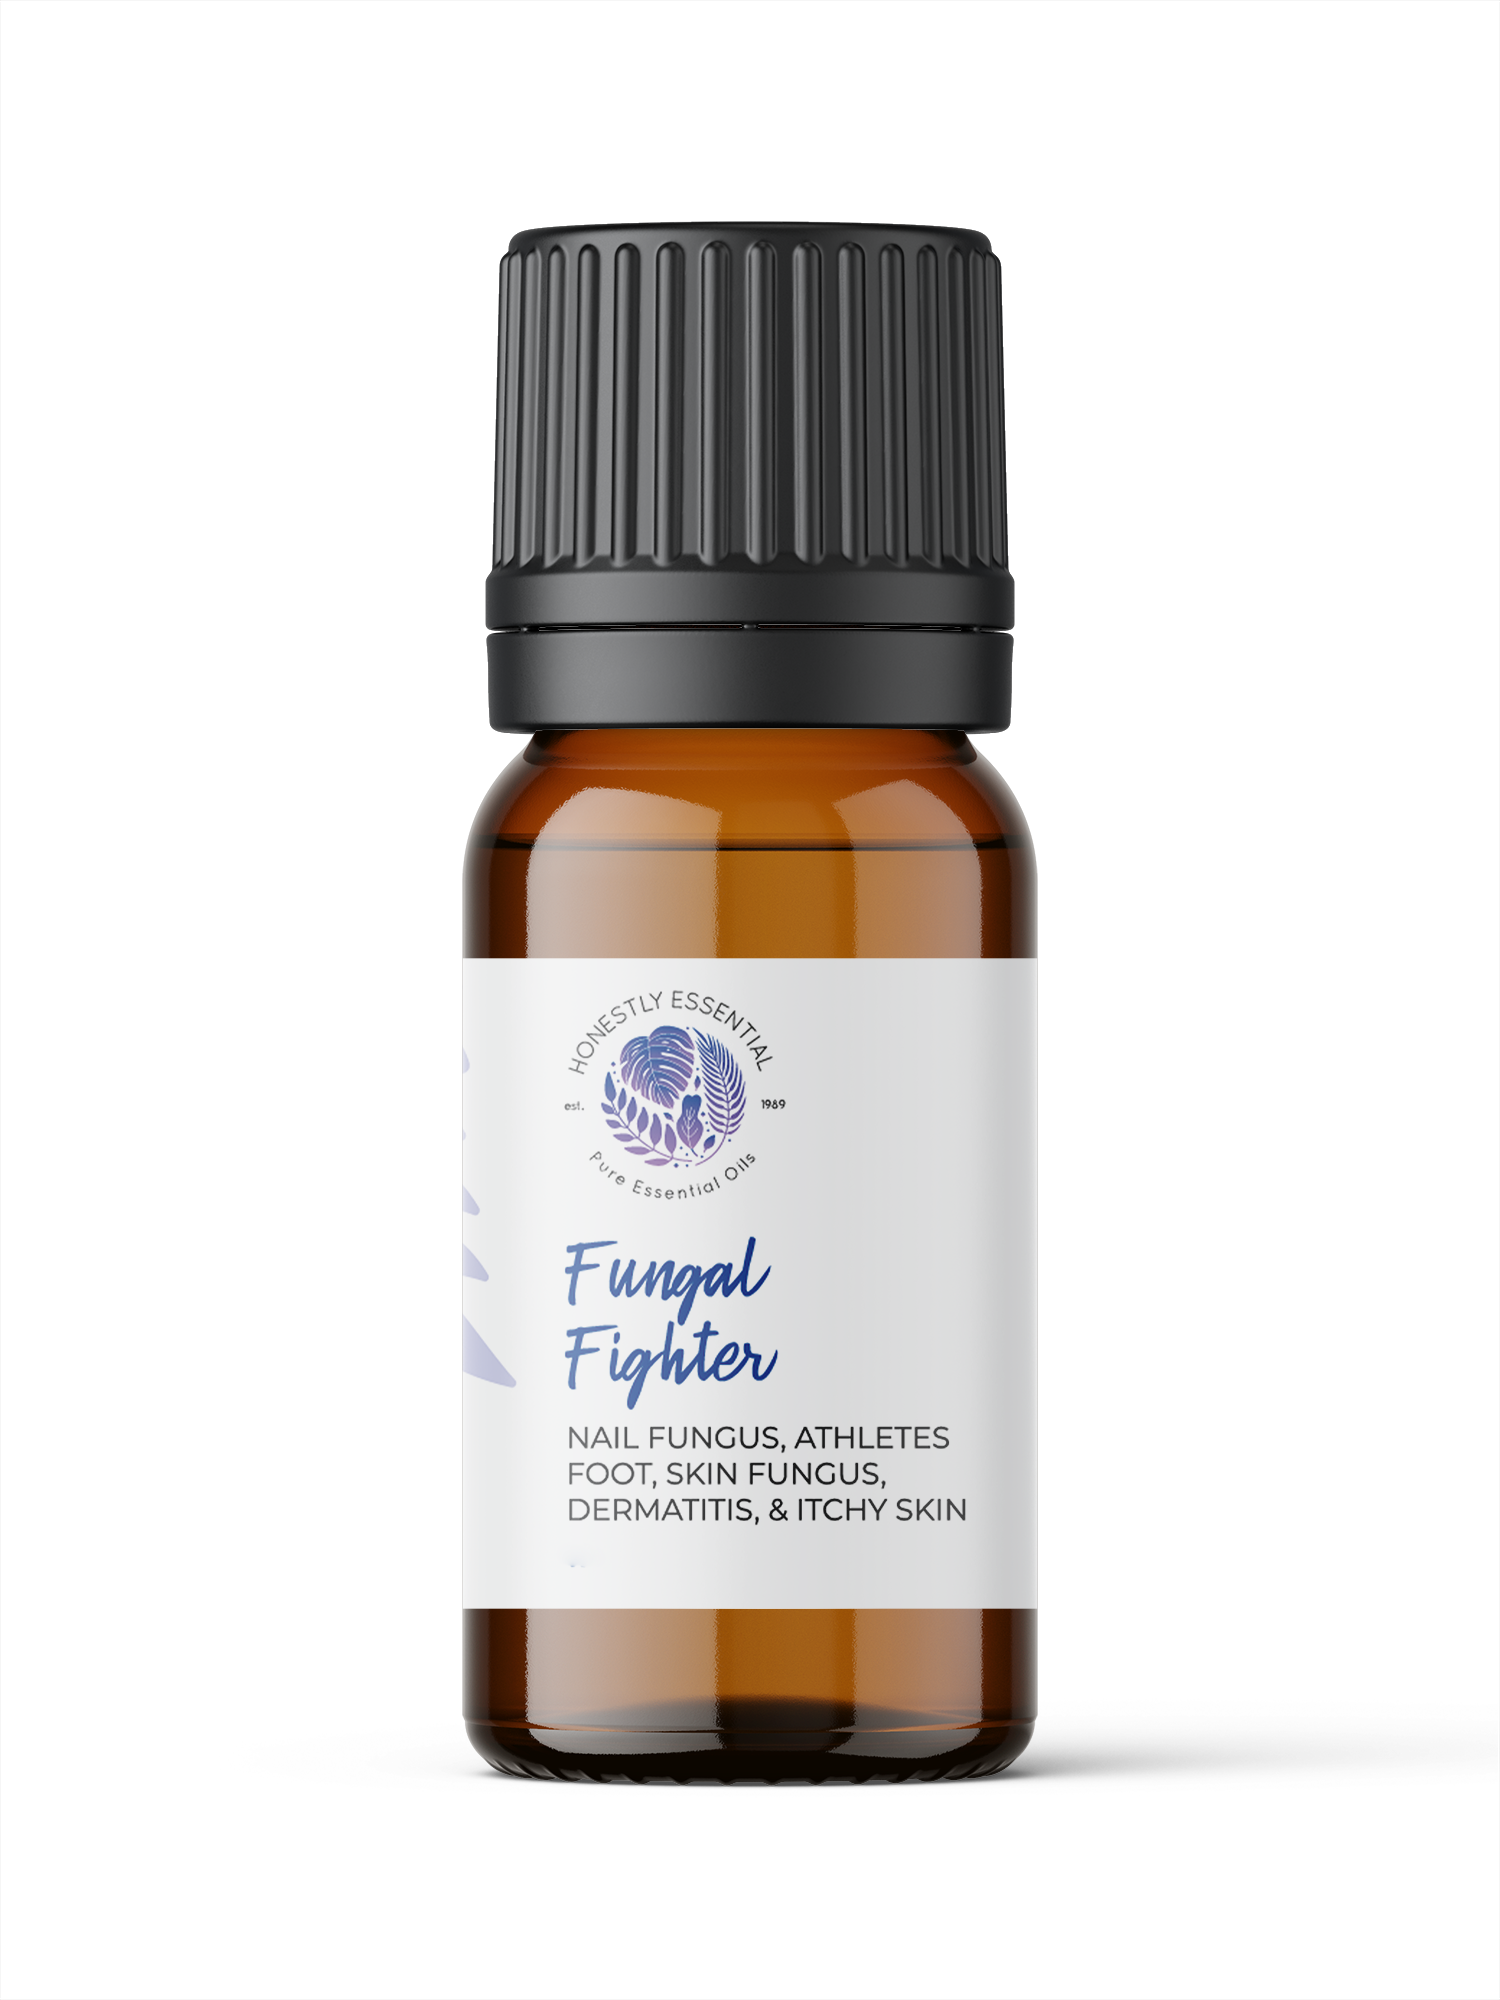 Fungal Fighter - Synergistic Blends | Honestly Essential Oils athletes foot, fungal conditions, fungal relief, fungal reliever, nail fungus, ringworm, synergistic